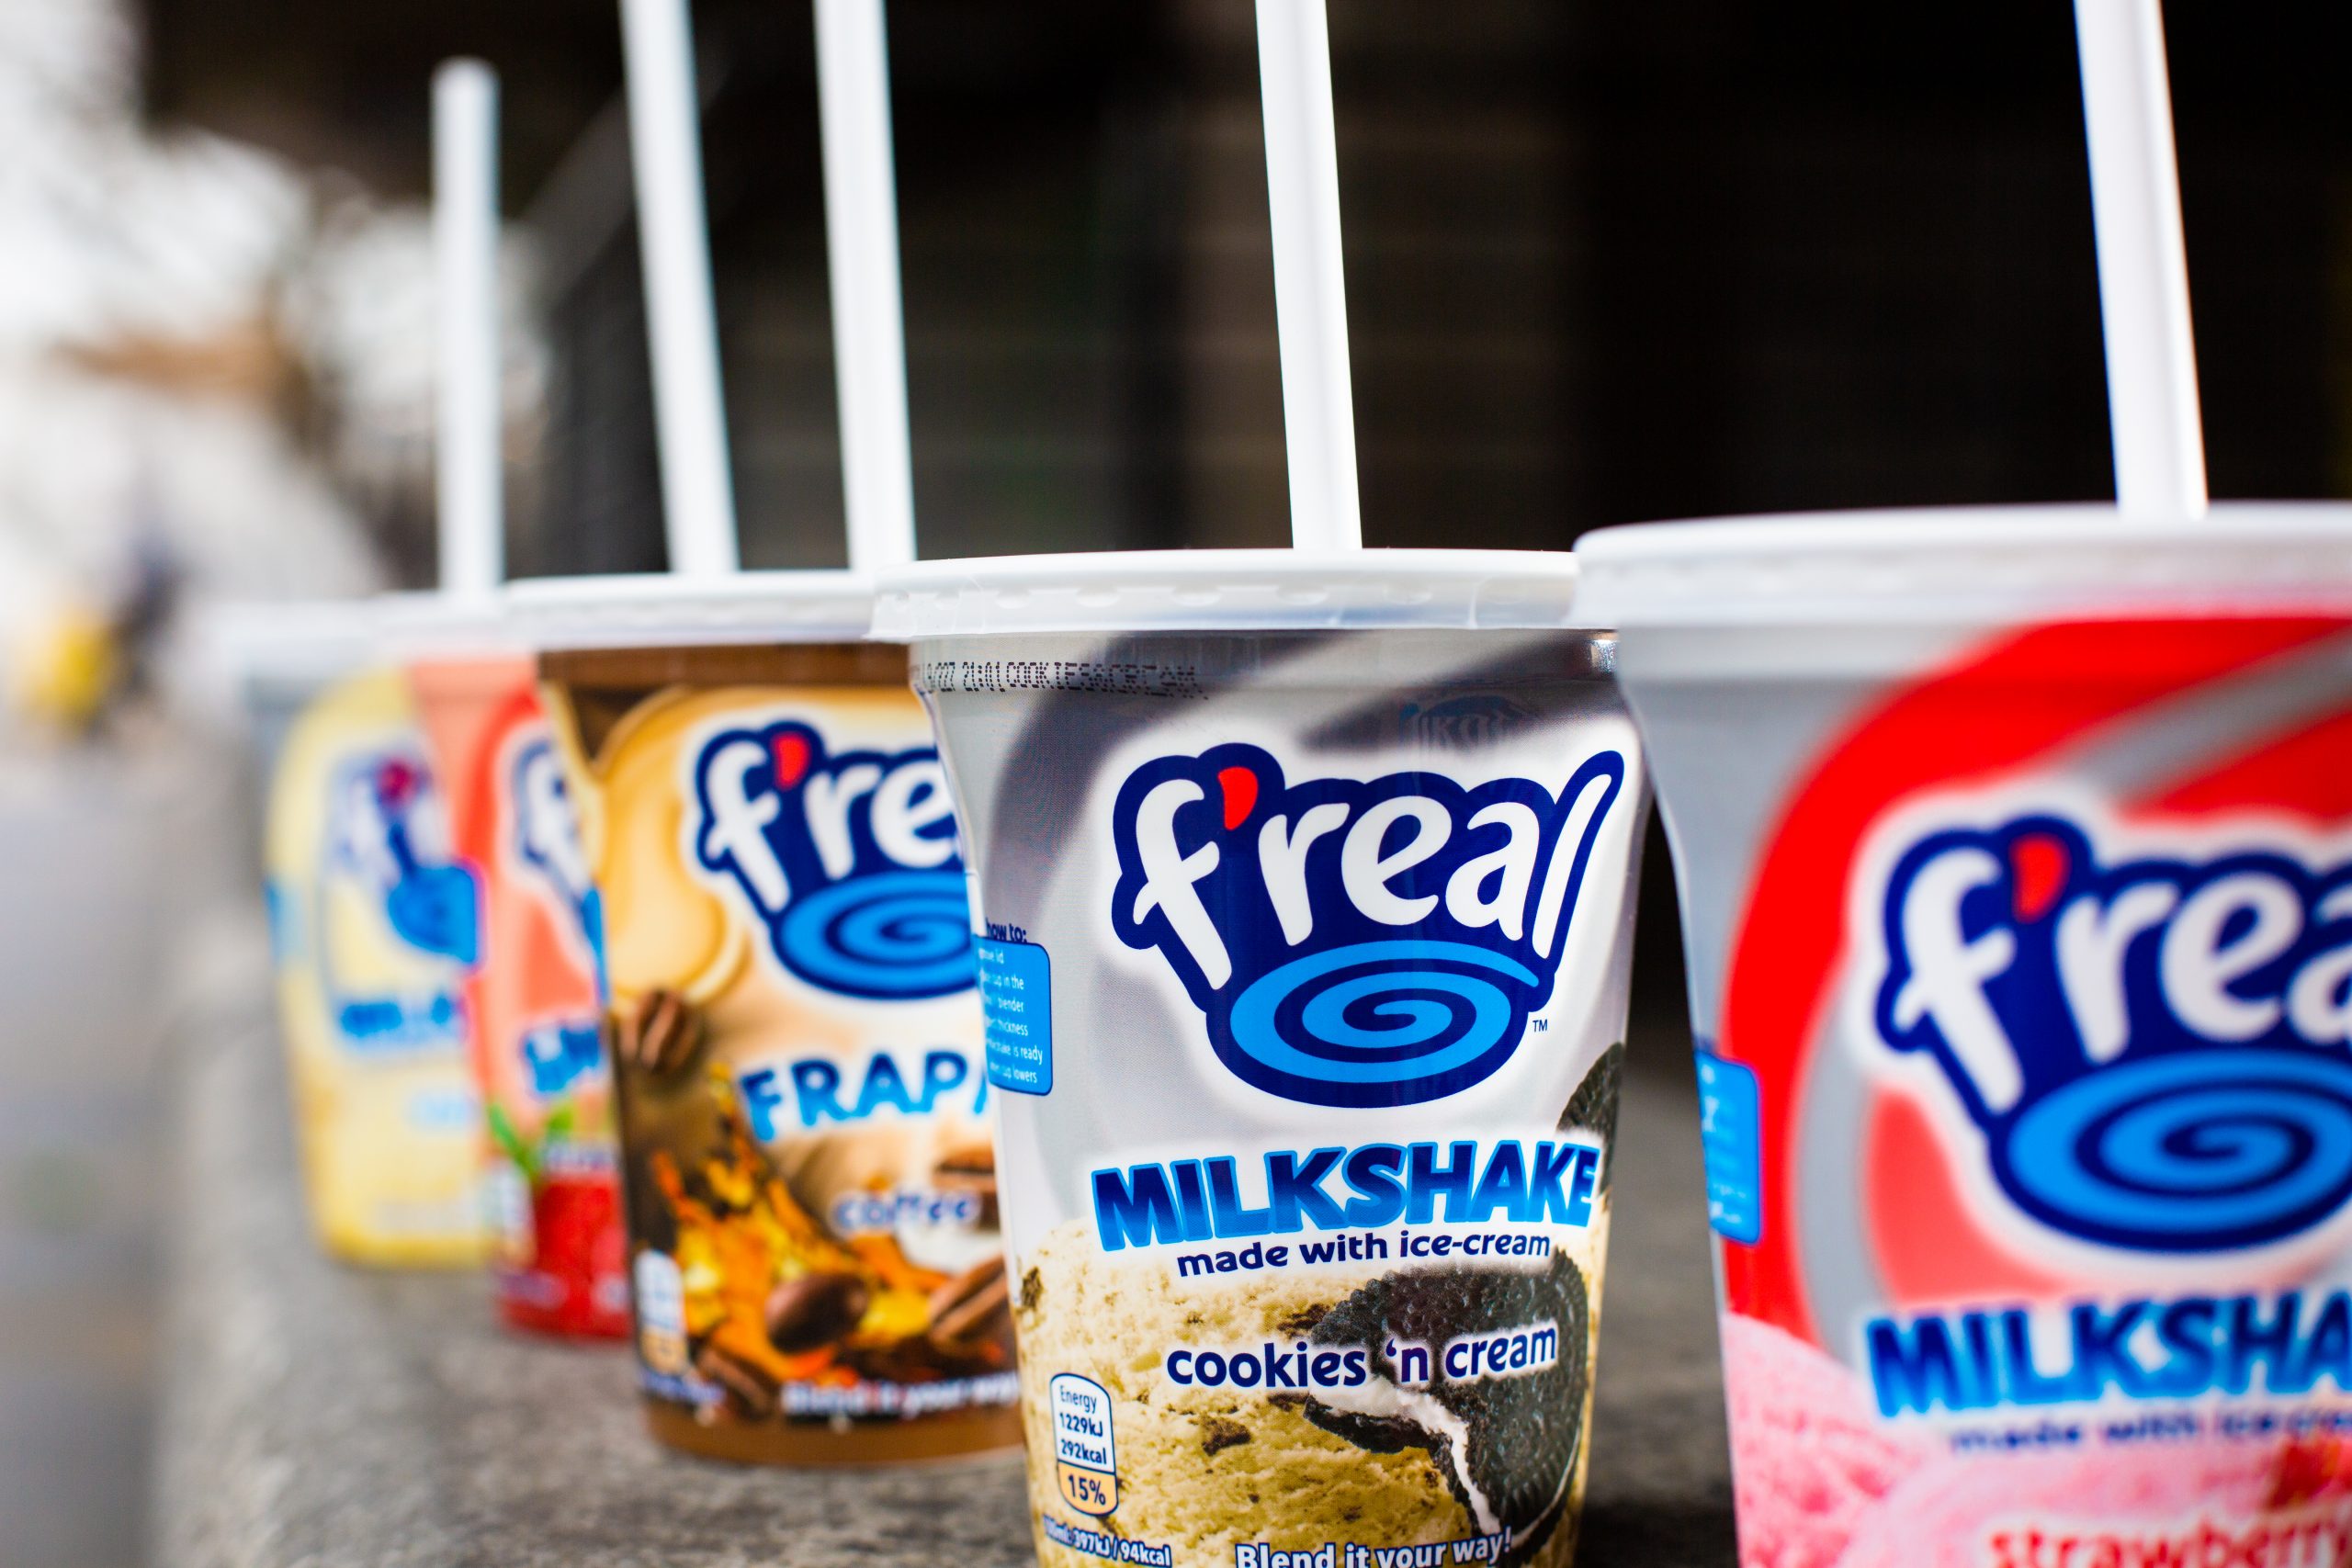 f’real now in 170 new One Stop stores